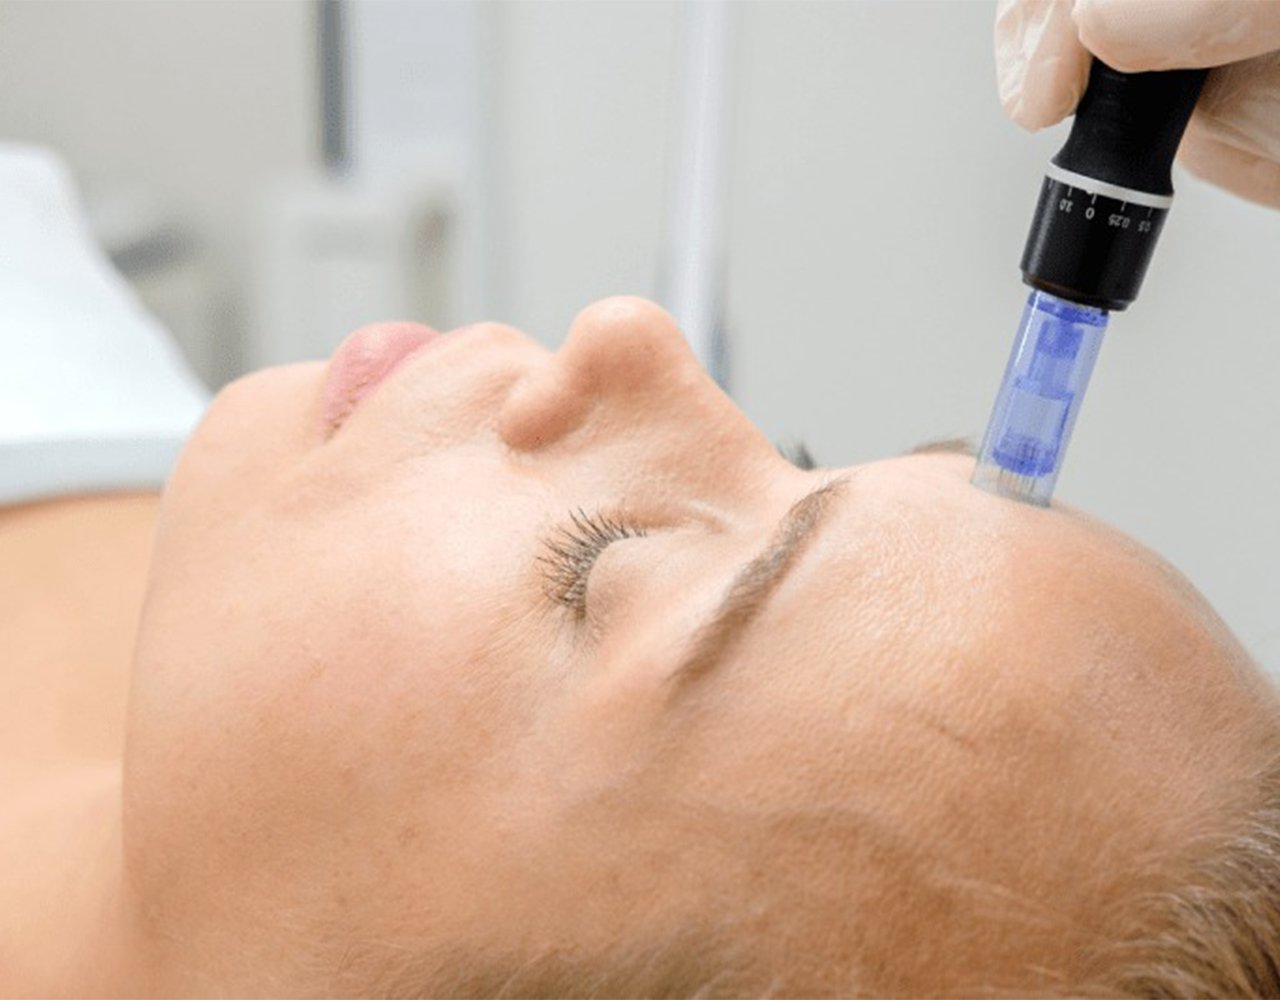 Interested in microneedling? Here's everything you need to know before booking an appointment